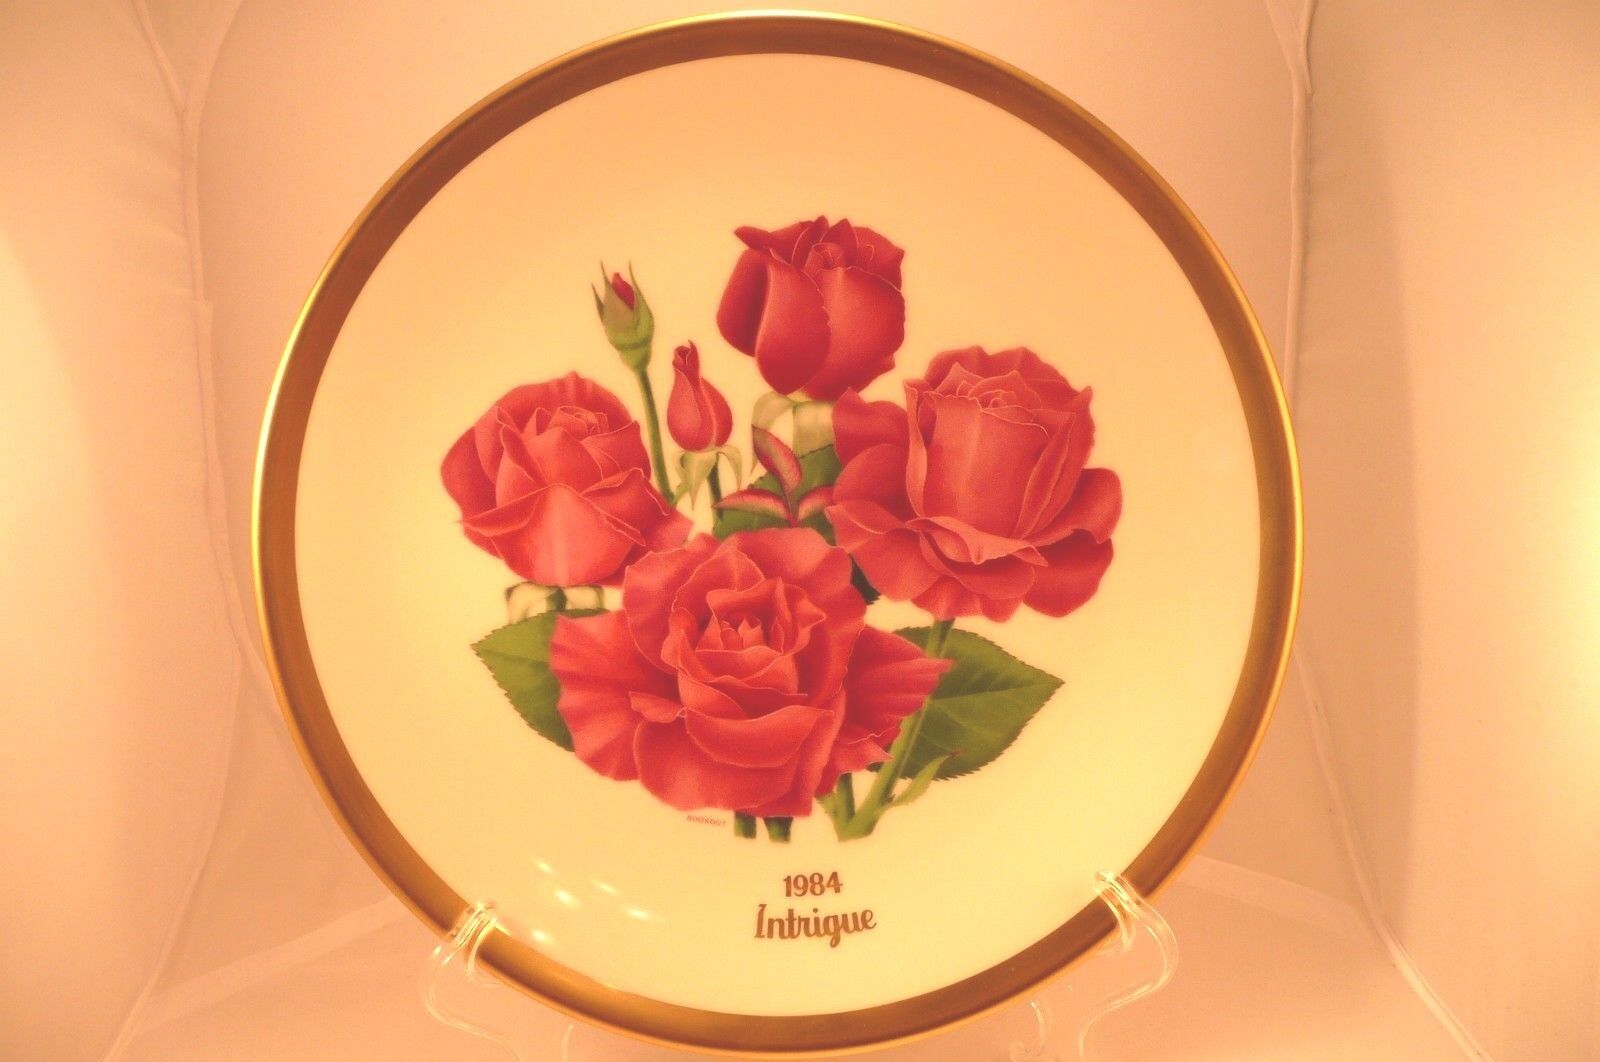 American Rose Society Collector’s Plate 1984 Intrigue Red Gold Trim Numbered LE